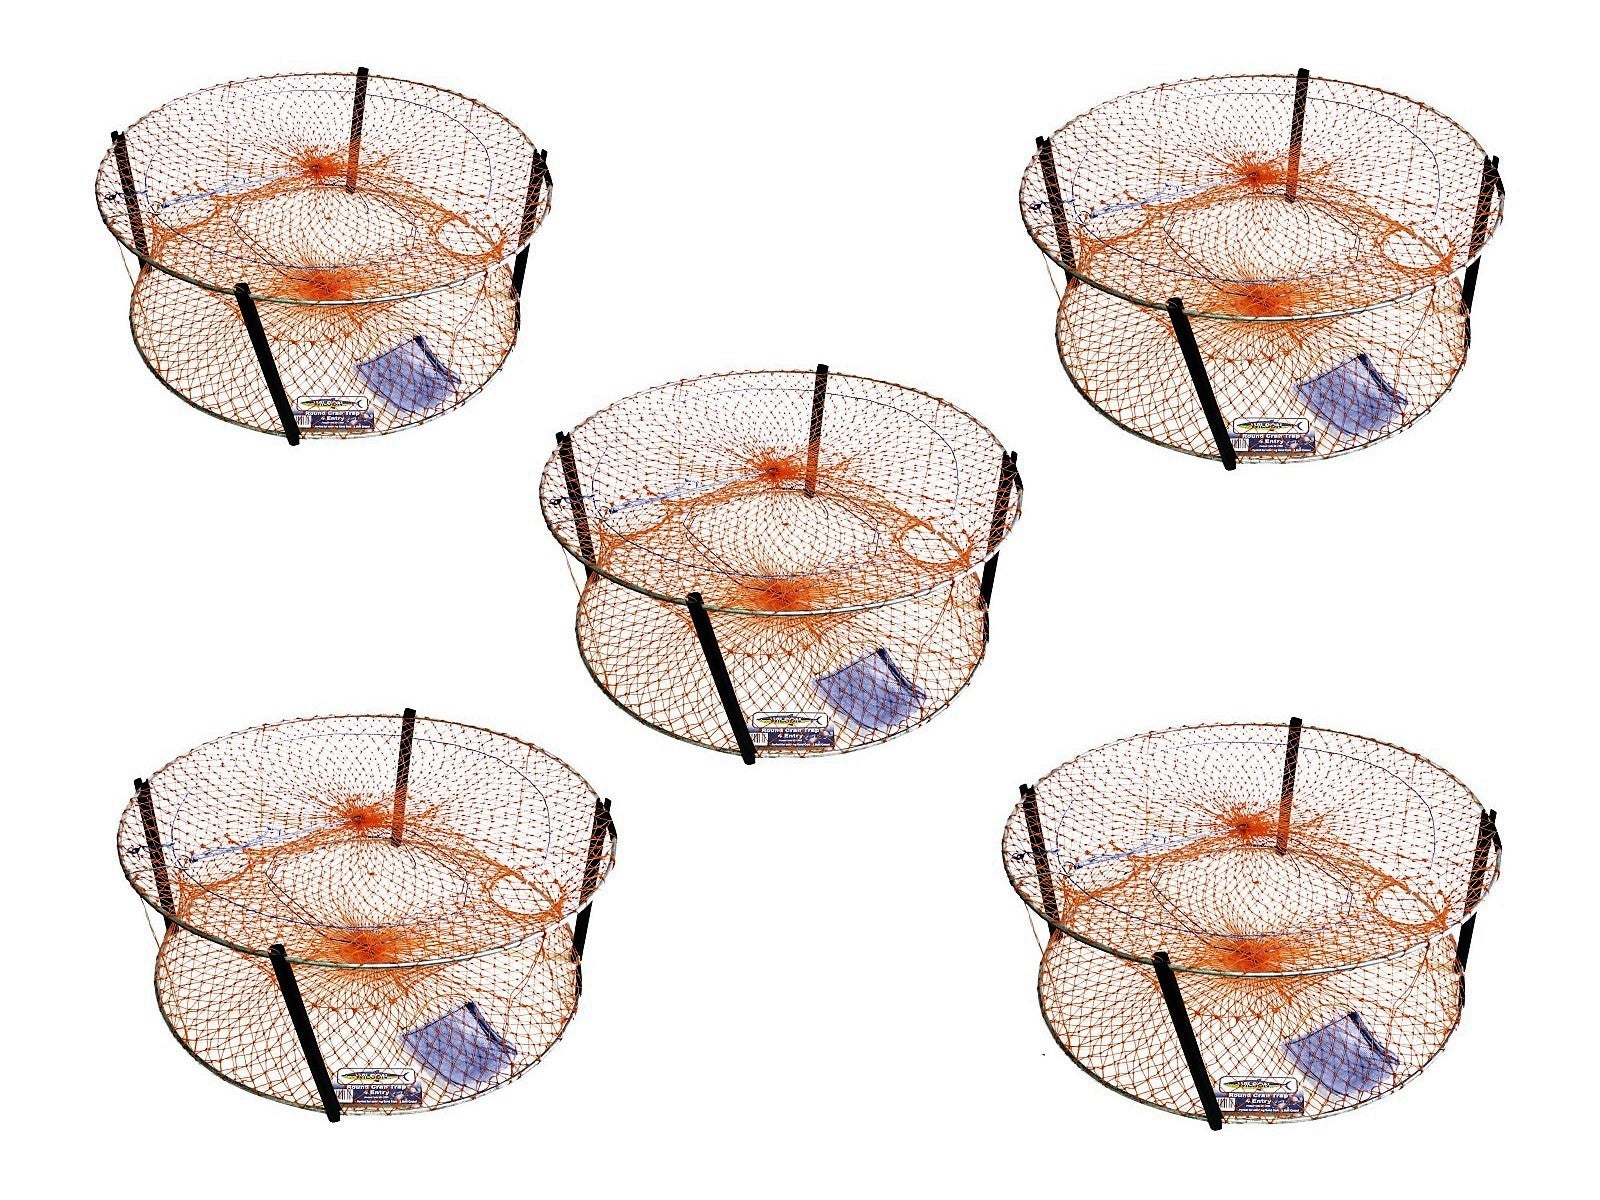 5 x Wilson Round Crab Traps - Bulk Pack of 4 Entry Crab Pots - 18 Ply Mesh